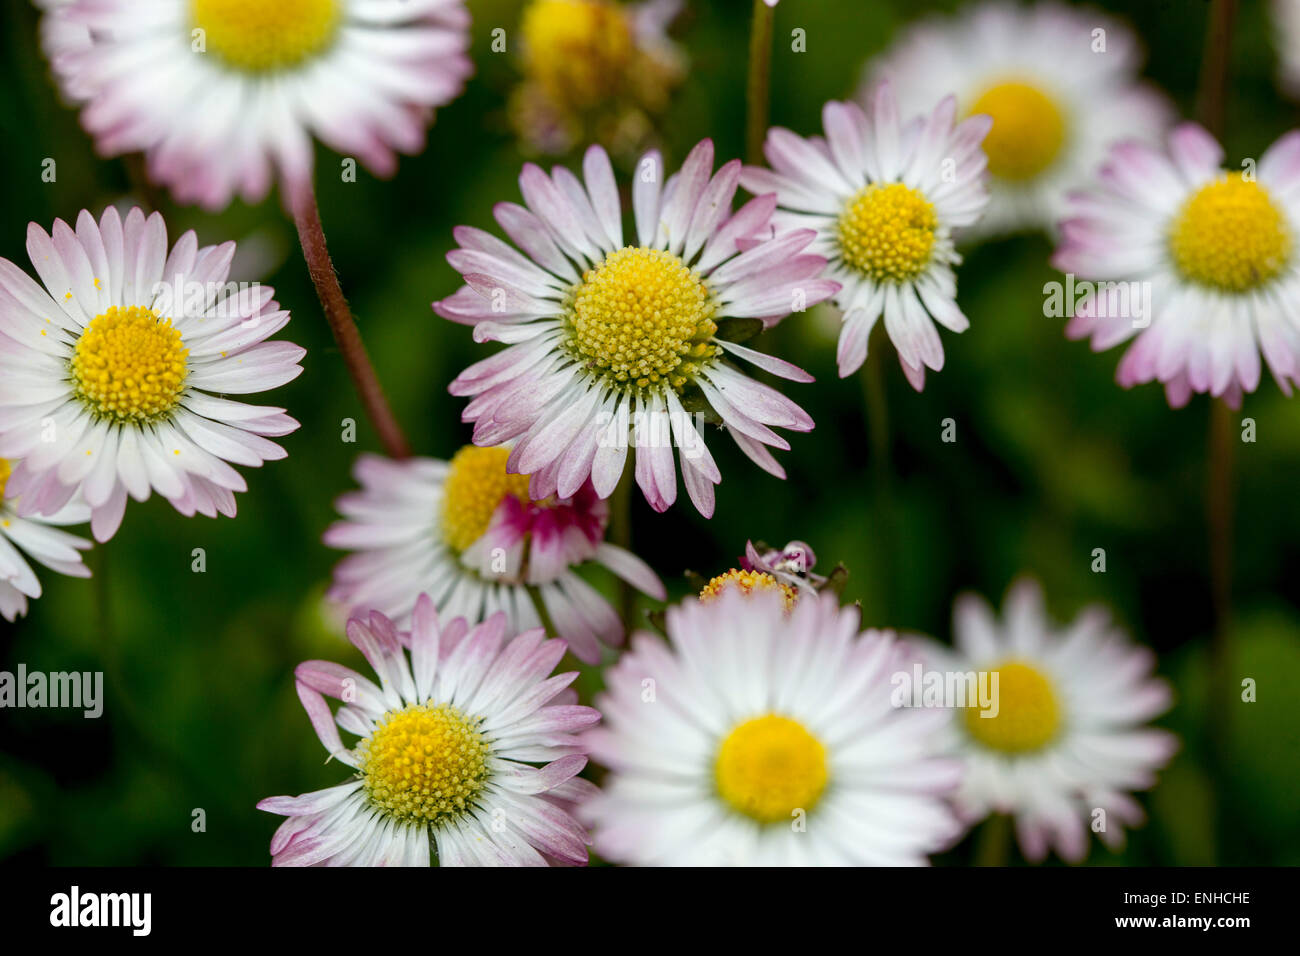 Common Lawn Daisies, Bellis perennis blooming perennial plant Stock Photo